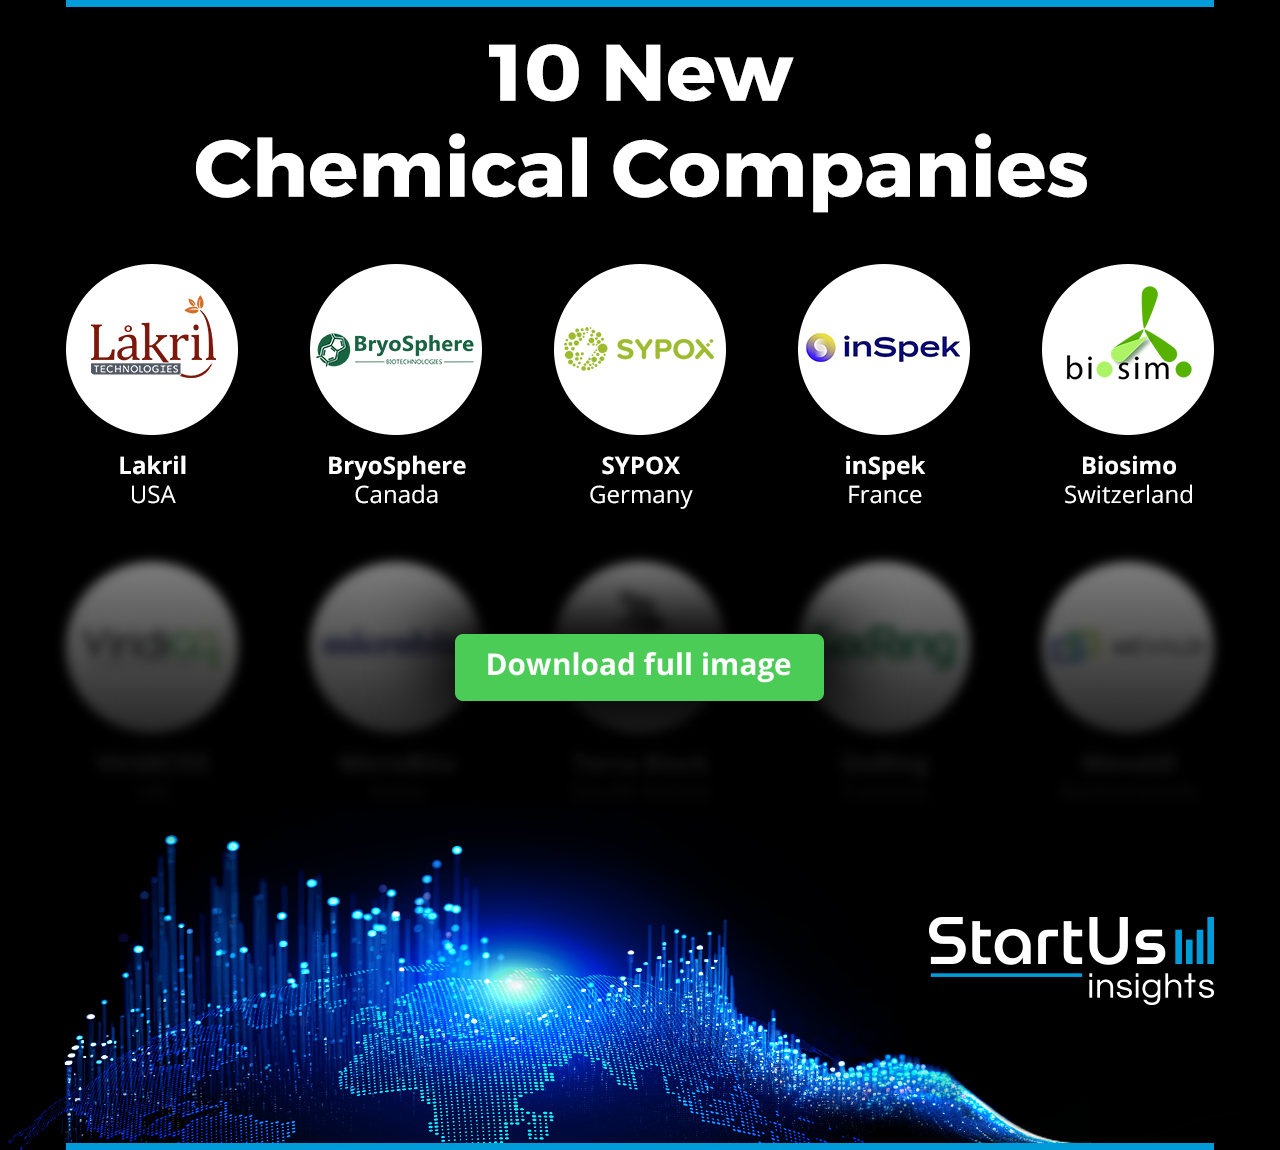 New-Chemical-Companies-Logos-blurred-StartUs-Insights-noresize